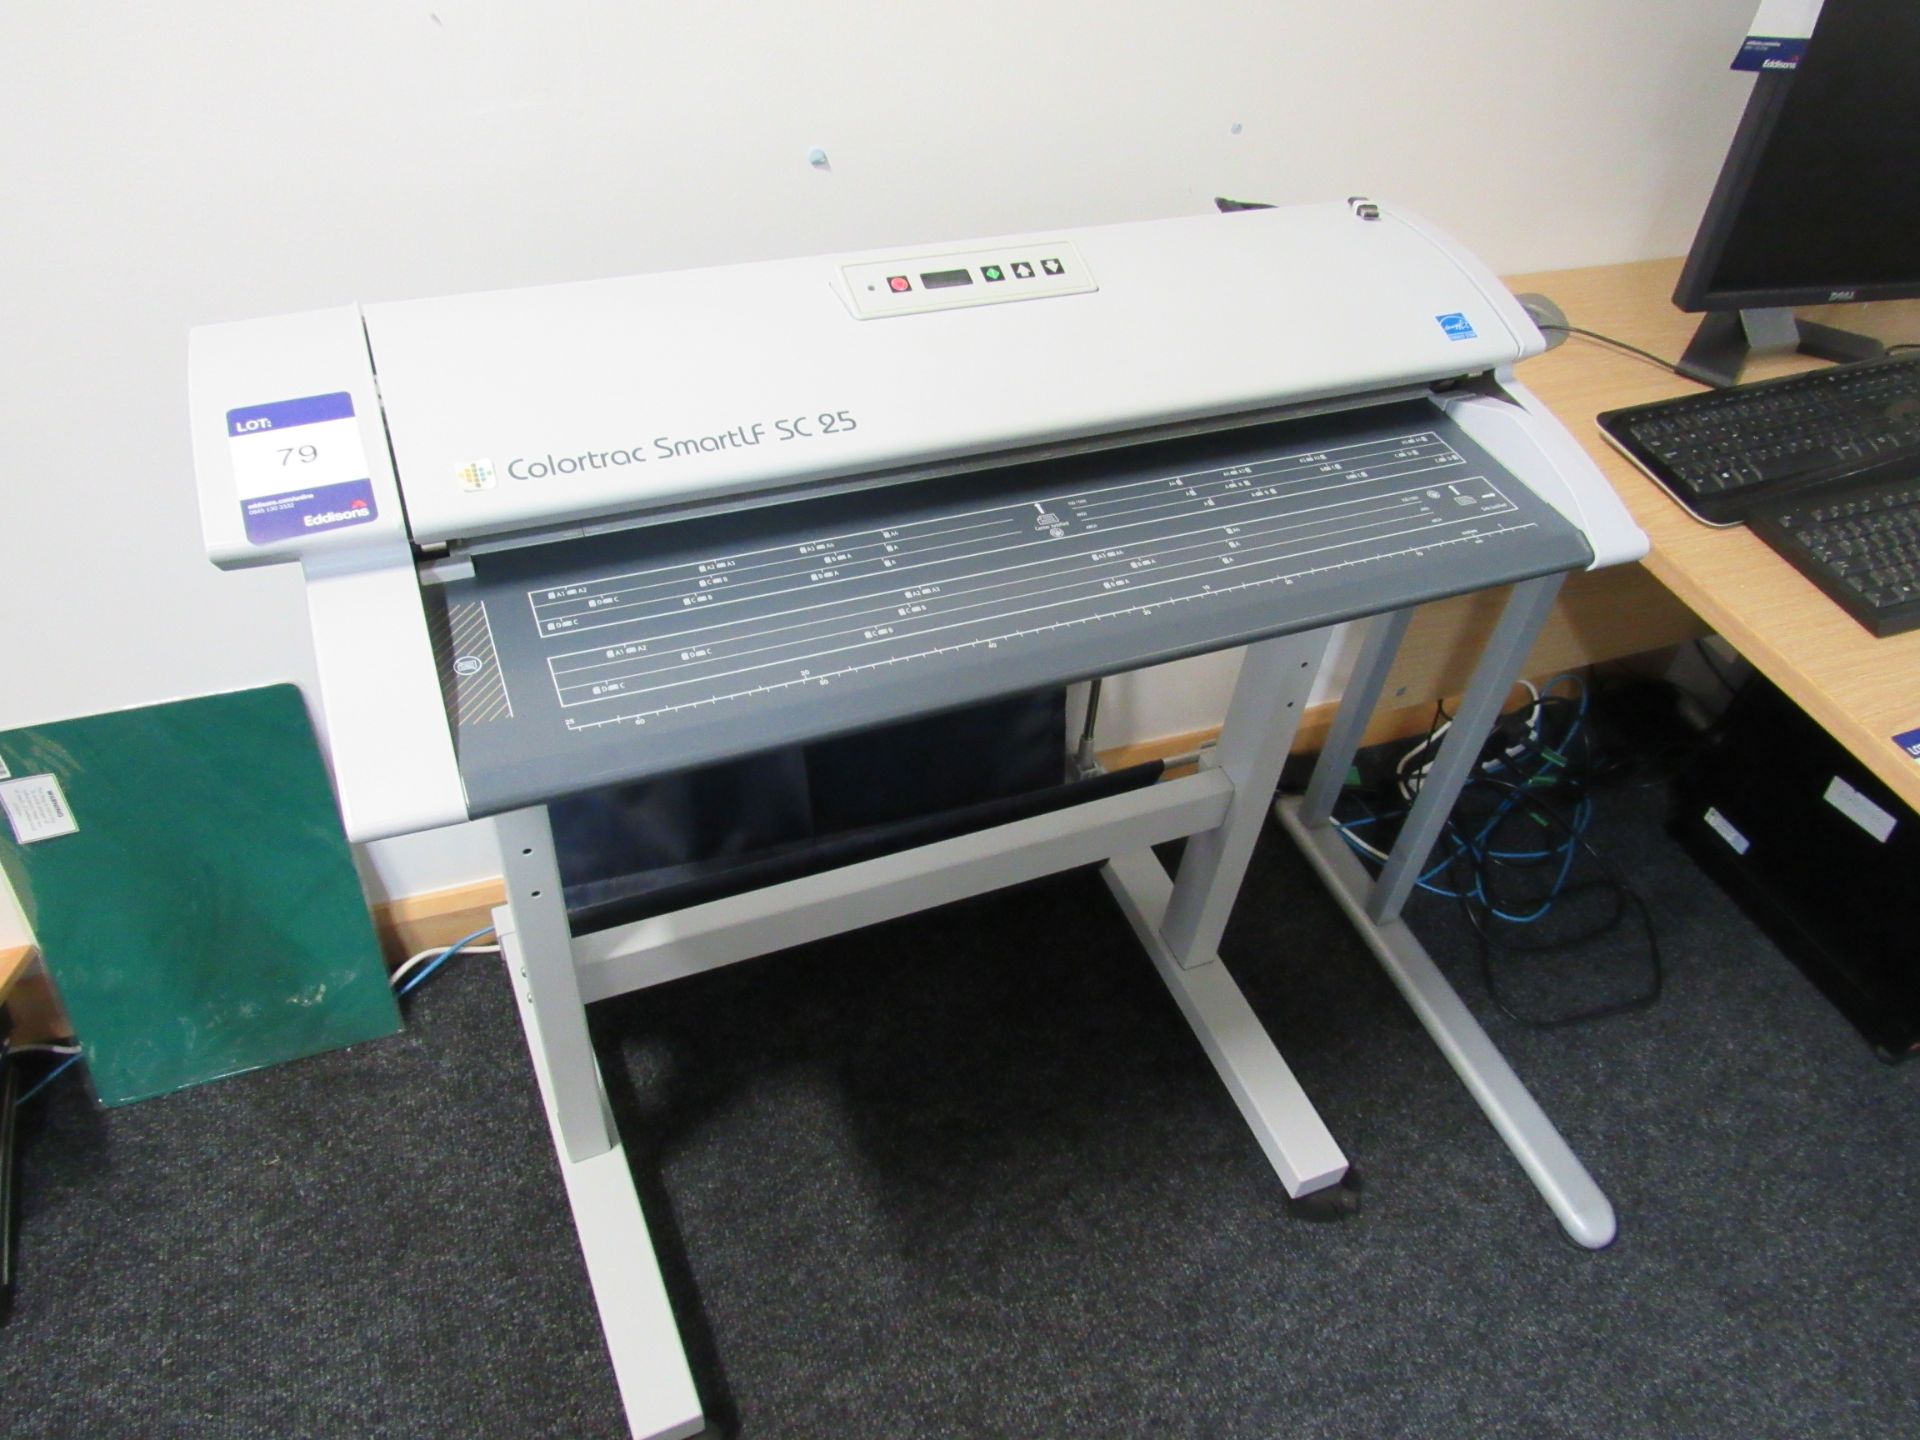 Colortrac Smart LF SC 25 Large Format Colour Scanner with Computer